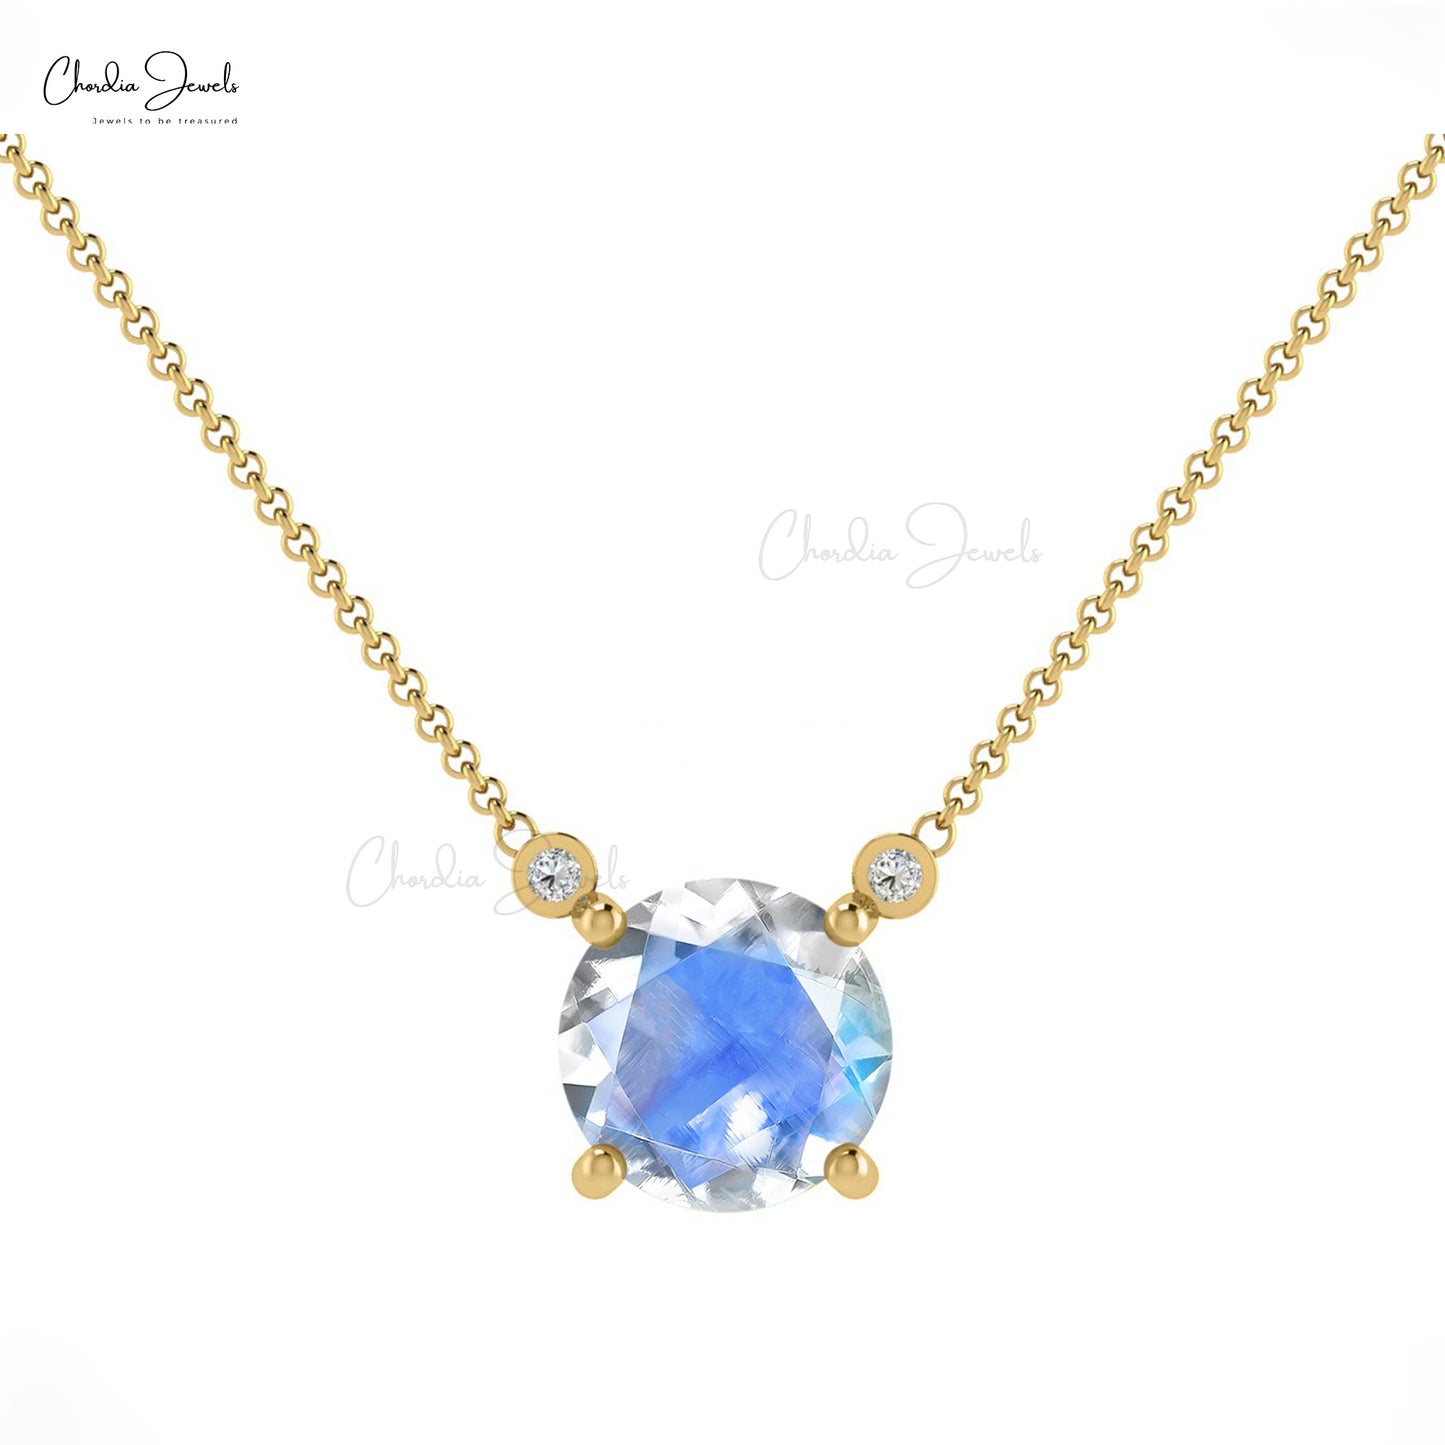 Load image into Gallery viewer, Natural Rainbow Moonstone Necklace, 14k Solid Gold Diamond Wedding Necklace, 6mm Round Faceted June Birthstone Necklace, Gift for Her
